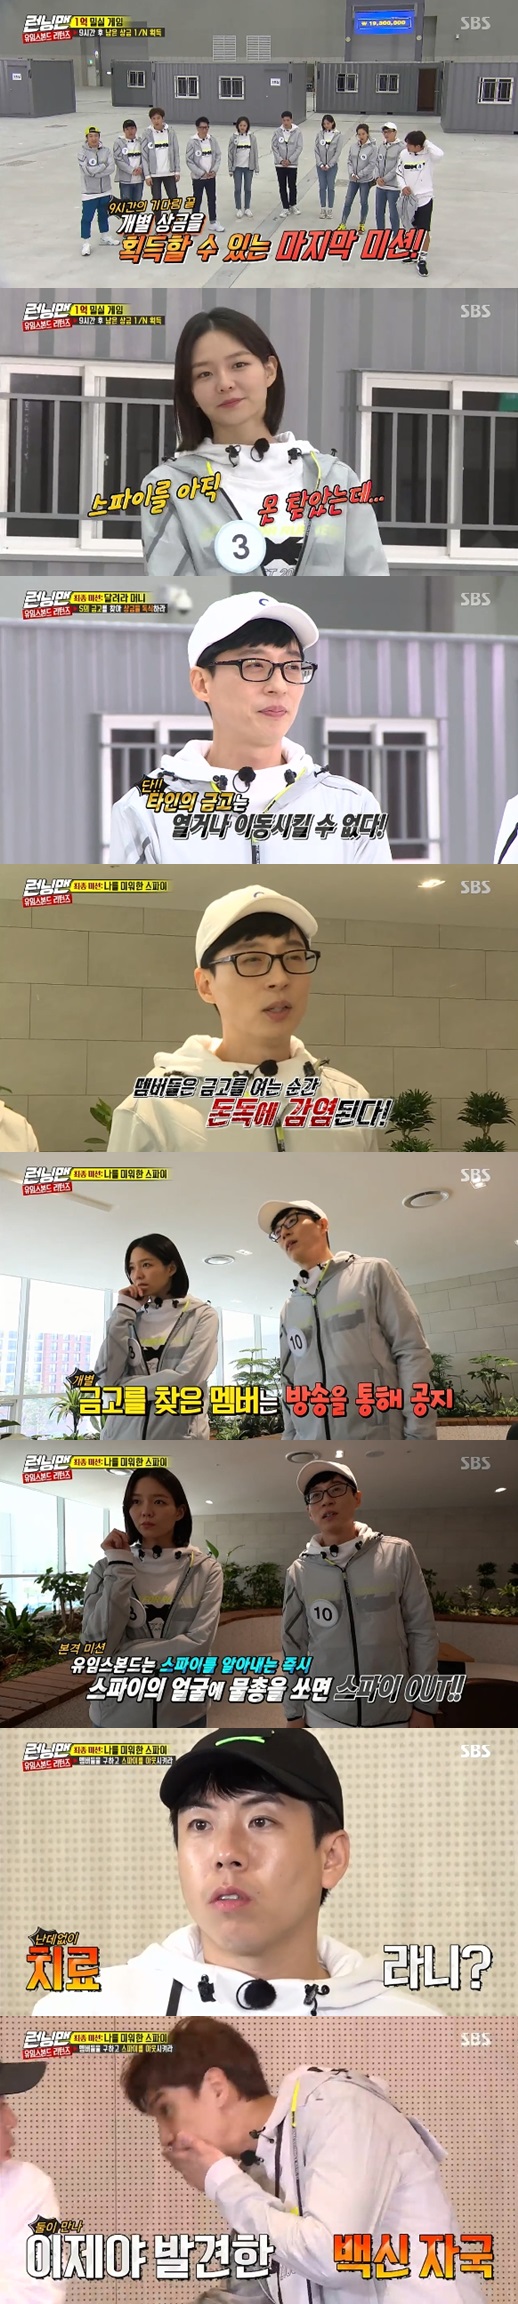 Comedians Yoo Jae-Suk and Actor Esom won the race title.On SBS Running Man broadcasted on the afternoon of the 28th, Actor Esom, Kim Kyung Nam and Shin Ha-kyun appeared as guest of the movie My Special Brother and performed Race.The cast headed to the host S, where the invitation was sent. The open venue was filled with containers.This game was a secret room race, which was divided into 1/N with members as much as it was saved: if you dont spend a penny for nine hours, you can get ten million won each.Individual expenditures are private and not personal; the necessary items are also available only on the intercom of each container.The cast, left alone in each container, fell into a menbung; they tried to purchase items on intercom to spend time, but many members gave up buying in the amount of the imagination.Nevertheless, Yoo Jae-Suk was enthusiastic about eating after purchasing a lunch box set for 4 million won.Among them, a radish that was not ordered by Yoo Jae-Suk arrived, and Yoo Jae-Suk finished the radish inhalation without any doubt.An hour later, the members gathered in the square began to doubt each other when the ten million won disappeared in an instant.Lee Kwang-soo was driven to the most likely suspect, but another member who ordered ramen was Esom, who laughed; he could afford to order the comb again, even the one he had taken.Other members also began to run around, lavishly ordering. Lee Kwang-soo even accidentally shot a bowl and fell asleep, but Kim Kyung-nam, a beginner of the arts, hesitated to consume alone.After the second meeting, the members headed back to their respective containers; Yoo Jae-Suk took out a questionable note.Esom secretly handed it to me when I met him in the square. Esom wrote, You are a Uyms Bond. You have to find and remove Spy.Im a Bond girl, he said, drawing a reversal.Yoo Jae-Suk bought water guns and special solutions, and Esom tried to destroy the evidence, and the two tried to find out who Spy was, but it was not easy.Among them, Kim Kyung-nam, who was quiet without spending a penny, left a meaningful word saying,  (You) Park Jae-seok is quiet.The final race to use the remaining amount was followed: finding a private safe and a host S safe would give you a balance.However, members except Spy are infected with pig poison when they open the safe, and they can treat it with the water gun of Yoo Jae-Suk.Yoo Jae-Suk secretly shot Yang Se-chan, Lee Kwang-soo, who opened the safe with the help of Esom, and the two were taken to the intensive care unit.After that, Haha and Song Ji-hyo found the safe.Yoo Jae-Suk, who became urgent, shot a water gun as soon as he found Song Ji-hyo, and Song Ji-hyo, who learned it, looked dismal.He shot a water gun straight at Ji Suk-jin, who happily shouted, Lets do it today! Haha was also quarantined with 30 seconds left.At this point, Kim Kyung-nam approached Yoo Jae-Suk with a suspicious move and Yoo Jae-Suk suspected him as Spy.But Spy was Lee Kwang-soo and host S was Actor Shin Ha-kyun.He said: It seems that Lee Kwang-soo has become a lot of a personality bad after being named as the successor to the Uyms Bond four years ago, and its a shame, (this)) trusting the ability of the Gwangsu.(Yu) make a chance to avenge his brother Park Jae-Seok, he said.Lee Kwang-soo carried quail eggs in his hat secretly by members to get clues to remove Yoo Jae-Suk.Esom, who witnessed this, was convinced that Lee Kwang-soo was Spy; at that time Lee Kwang-soo found a hint of breaking eggs in Park Jae-seoks head.Yoo Jae-Suk and Esom, who finally met Lee Kwang-soo, desperately blocked him and Yoo Jae-Suk succeeded in shooting water shot into Lee Kwang-soos face.Angered Lee Kwang-soo threw raw eggs into the face of Yoo Jae-Suk.The last host, S Shin Ha-kyun, presented the winning Yoo Jae-Suk and Esom with an honorary pure gold card; followed by a plight for Lee Kwang-soo.